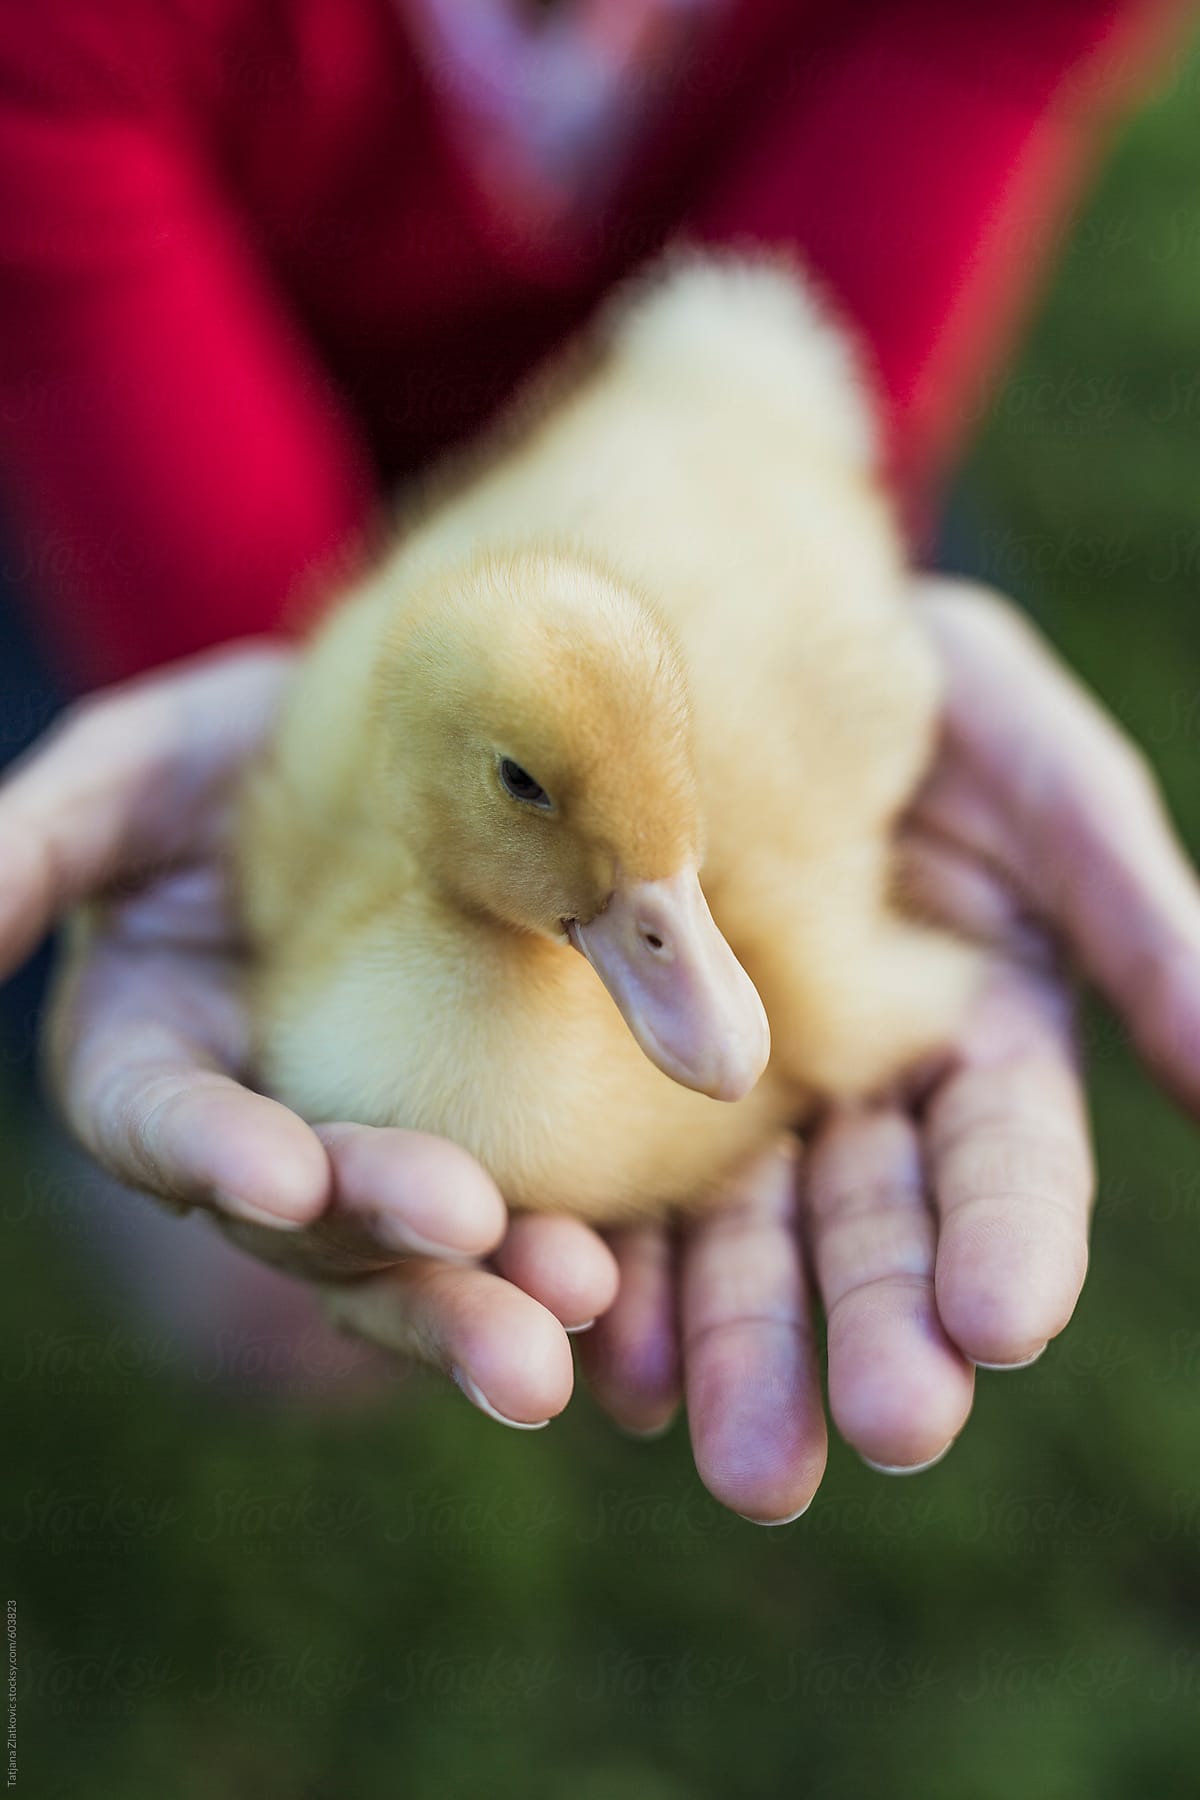 Woman holding small duck